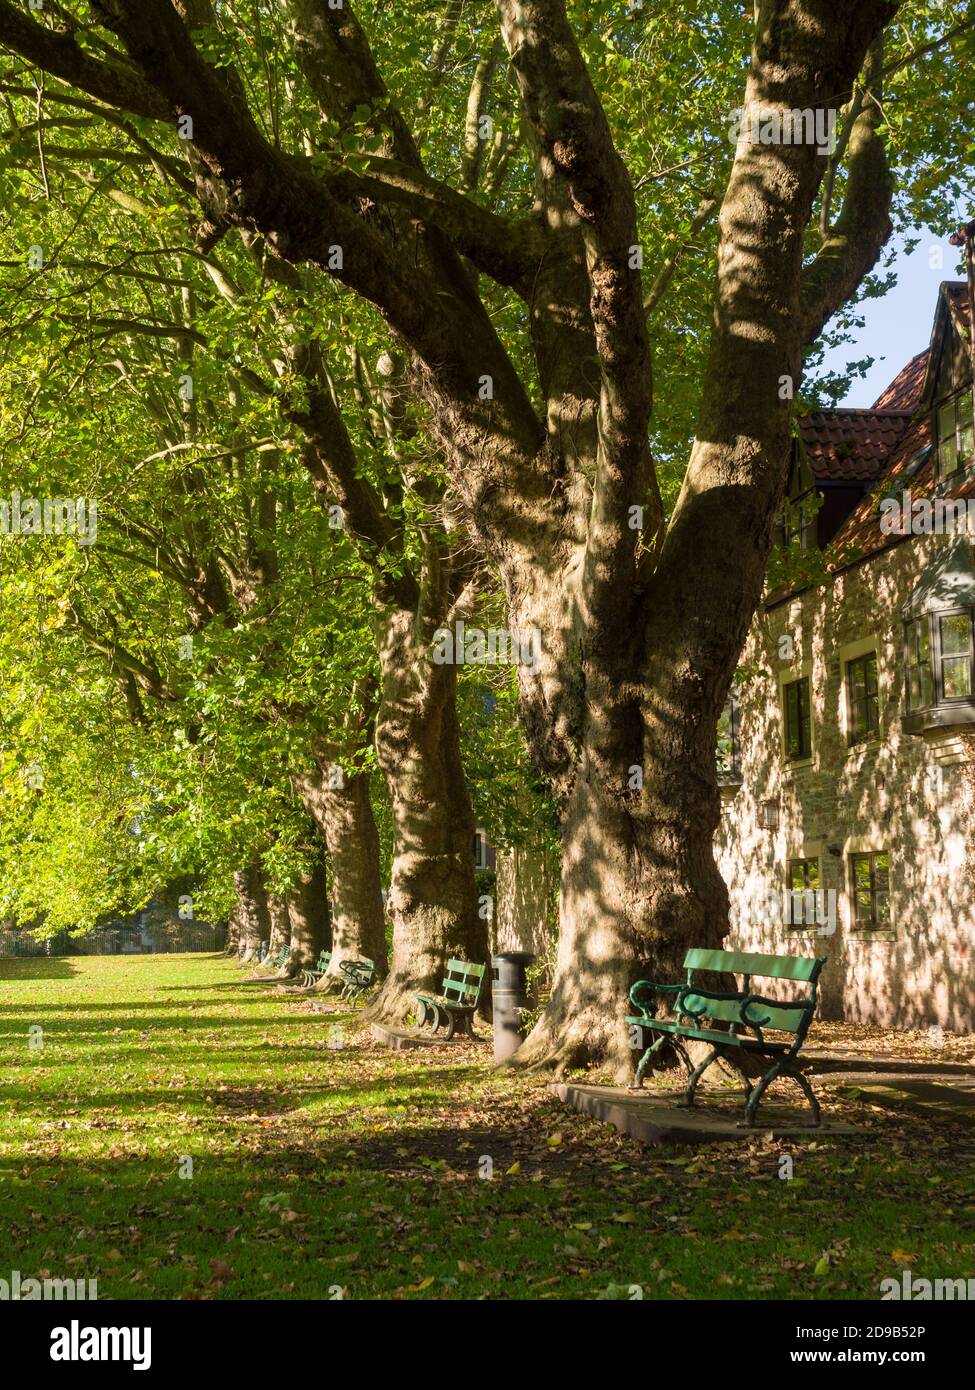 A row of sycamore (Acer pseudoplatanus) trees in the recreation ground in the city of Wells, Somerset, England. Stock Photo